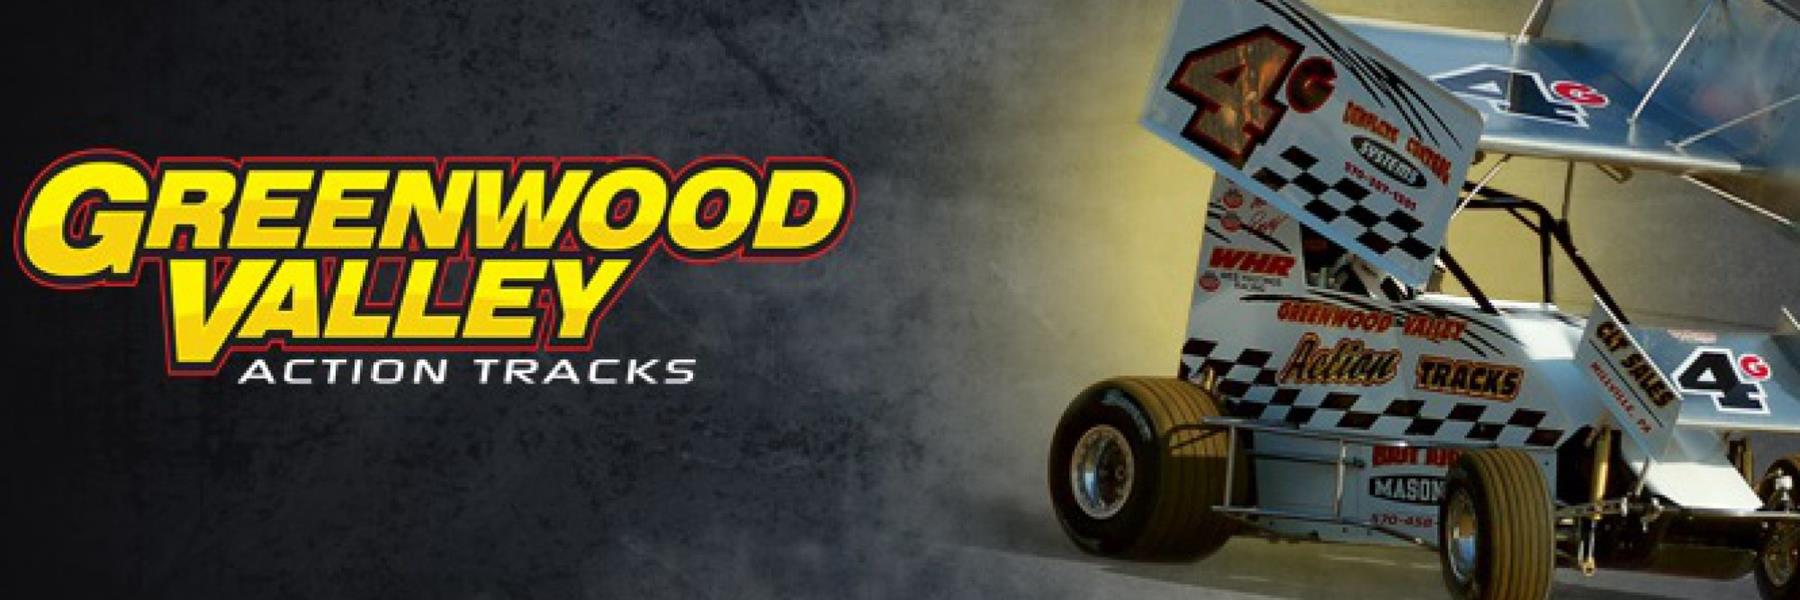 5/11/2019 - Greenwood Valley Action Track